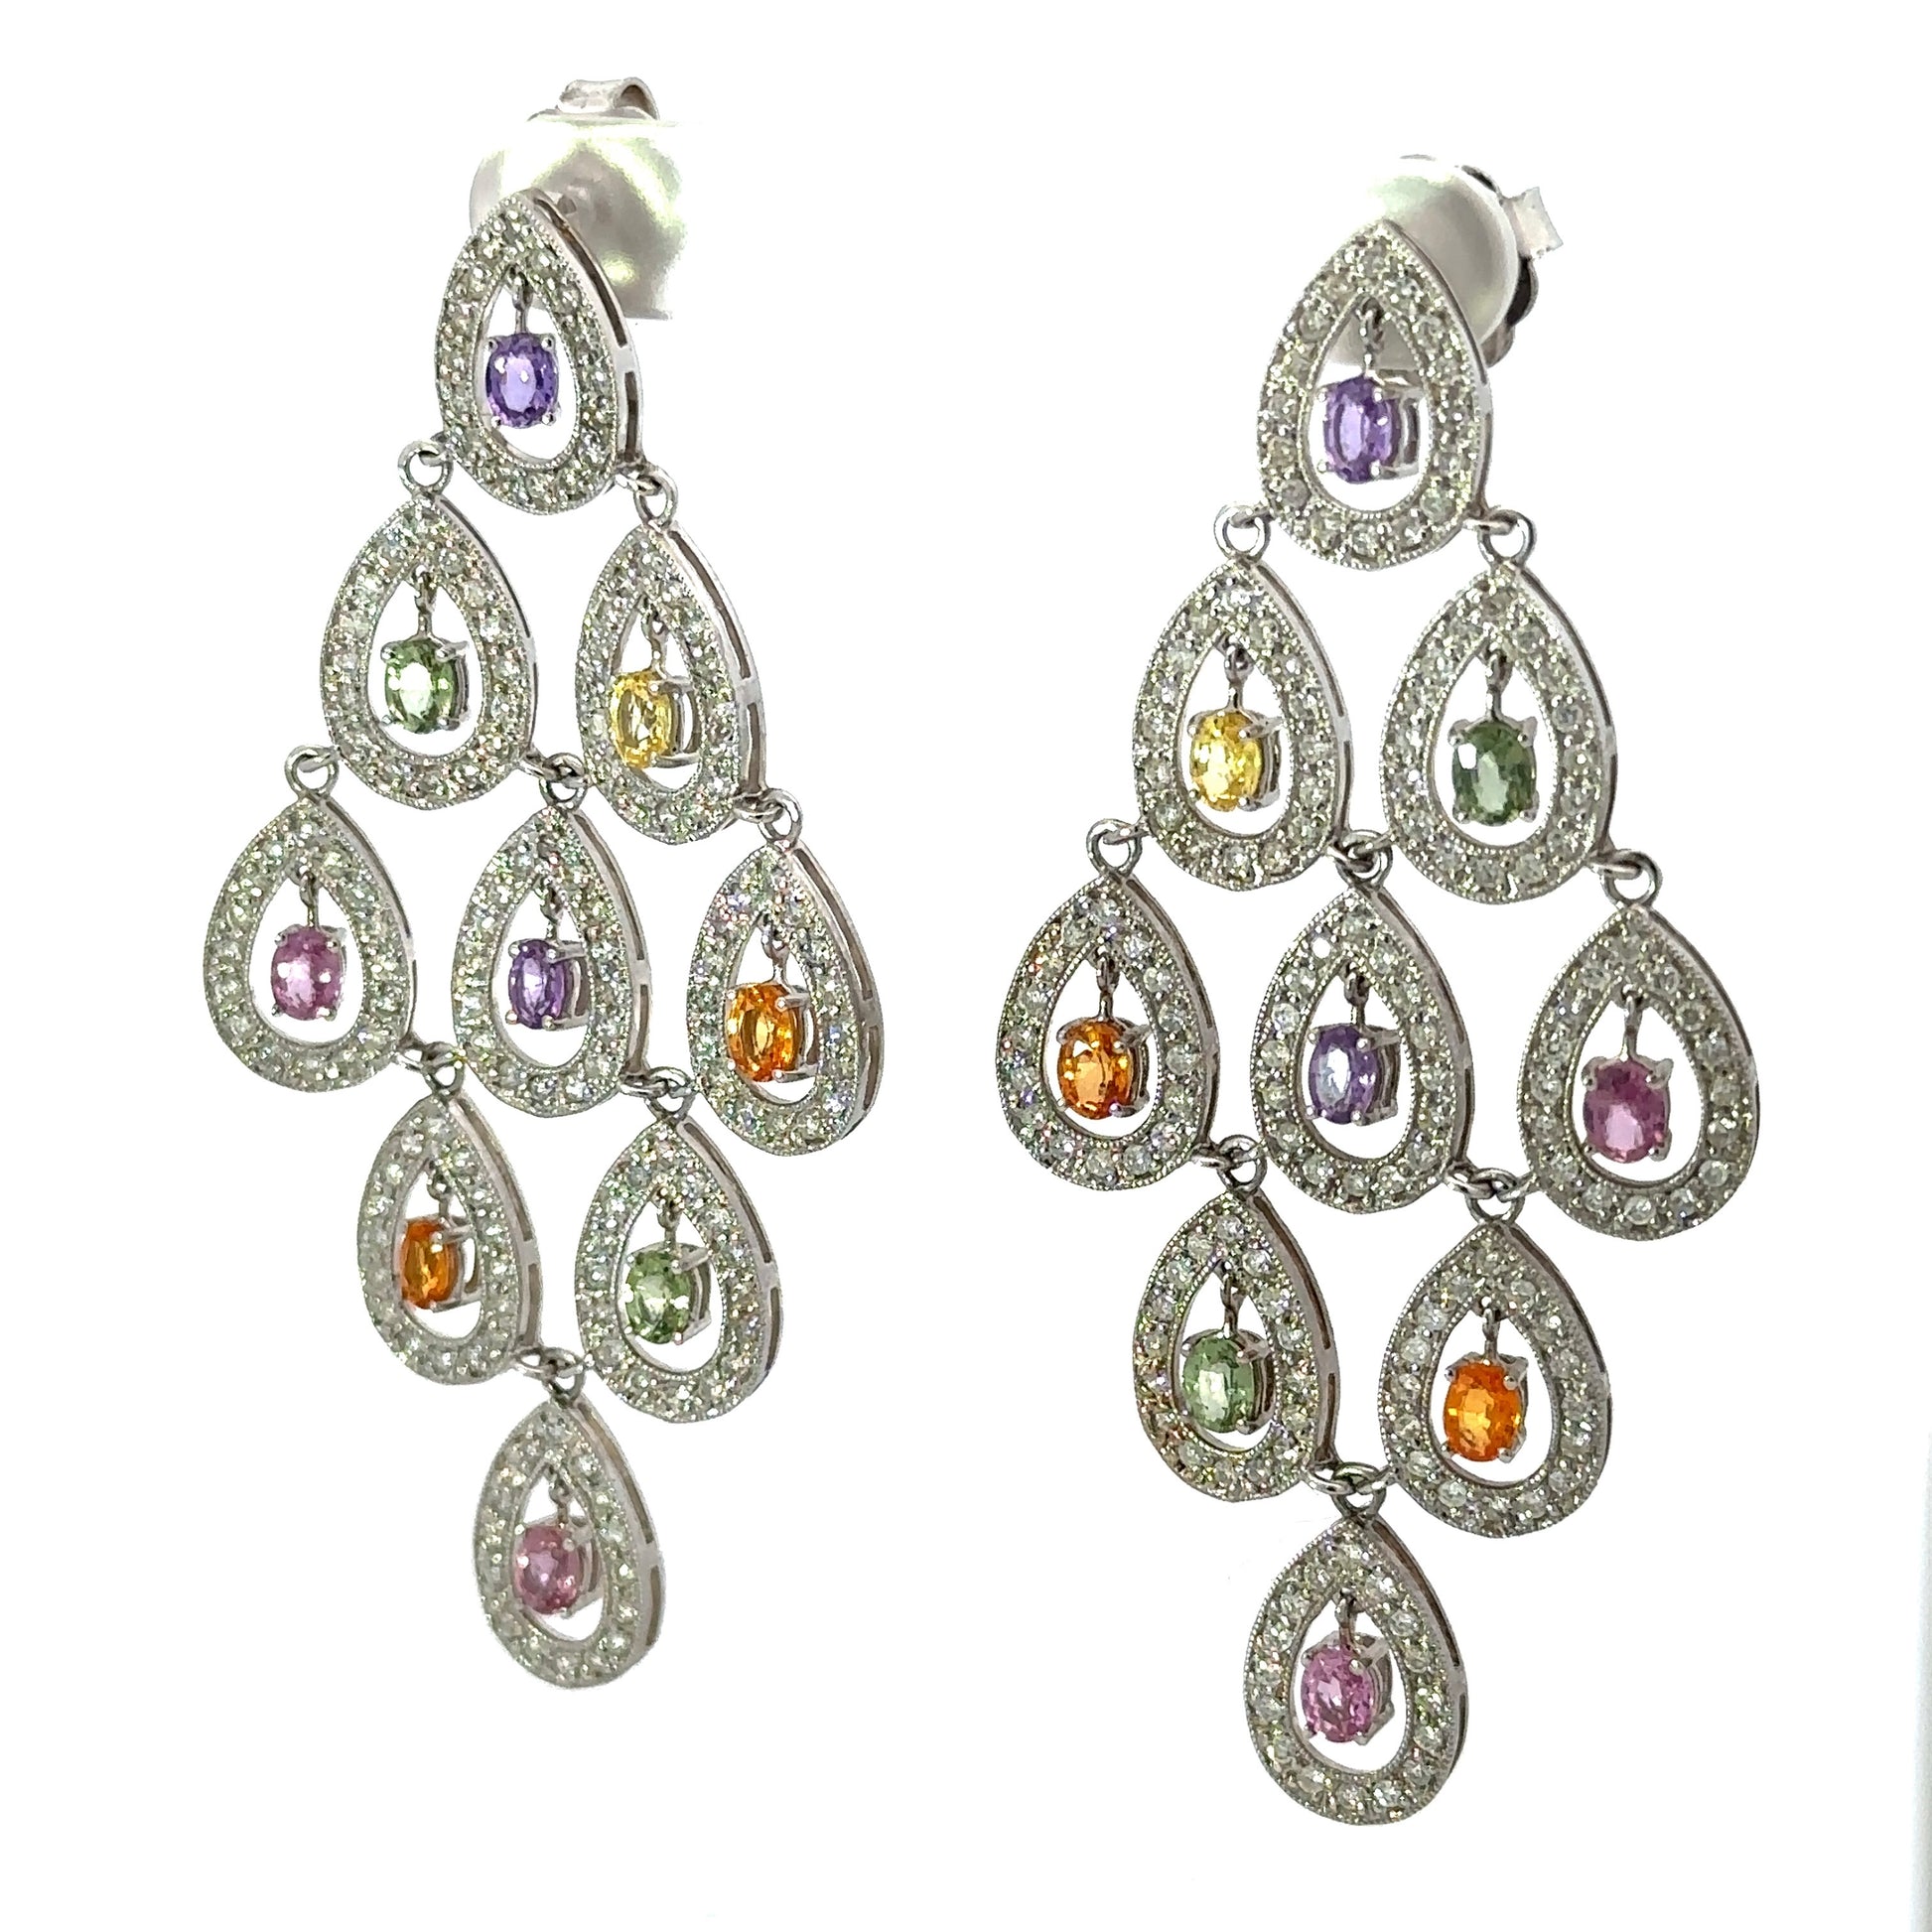 Diagonal view of white gold diamond and multi colored gemstone drop earrings